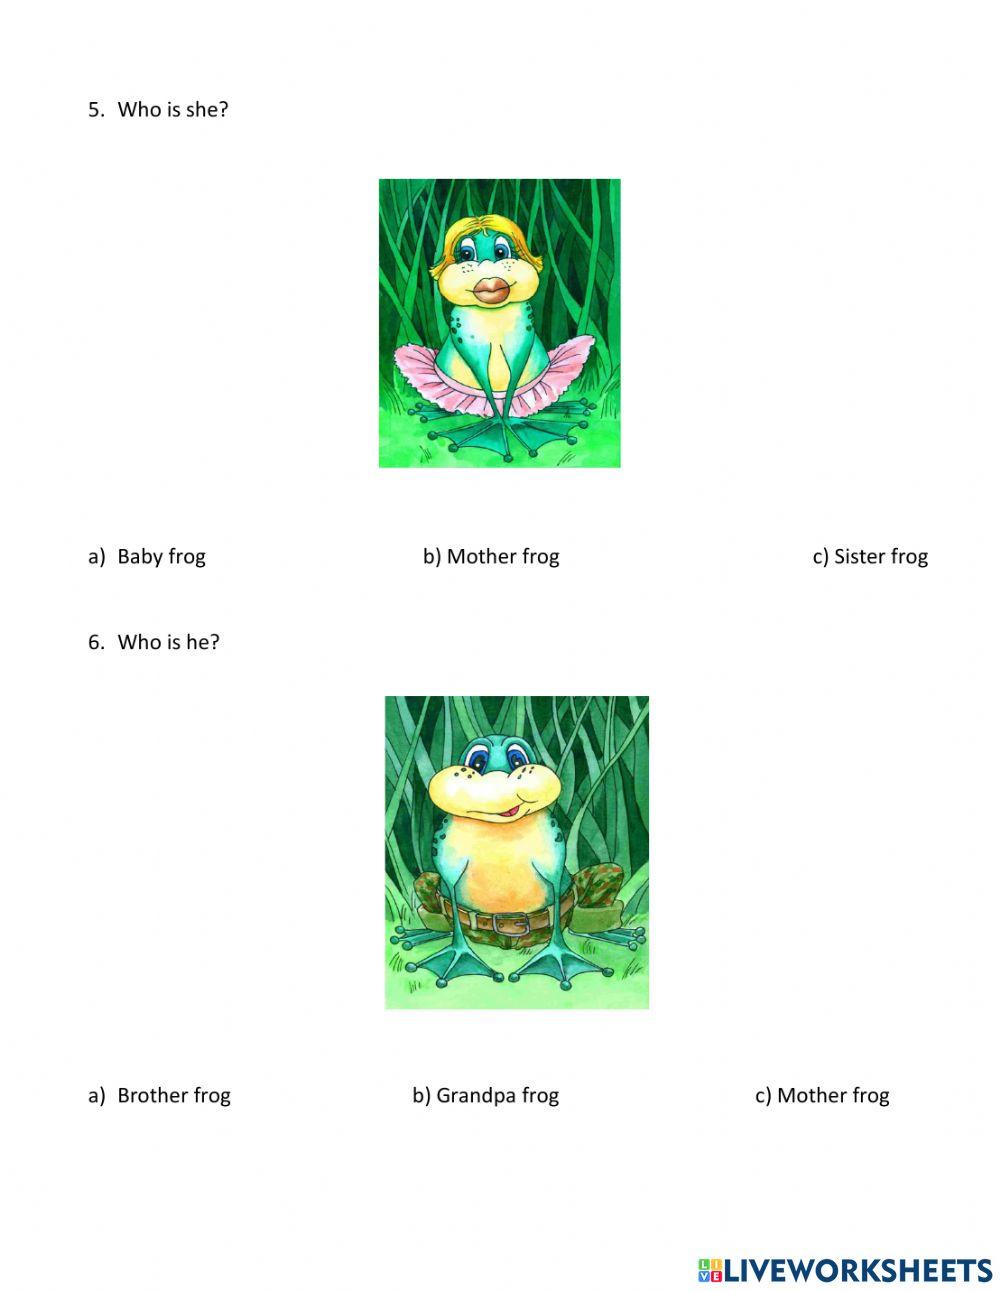 The frog family quiz